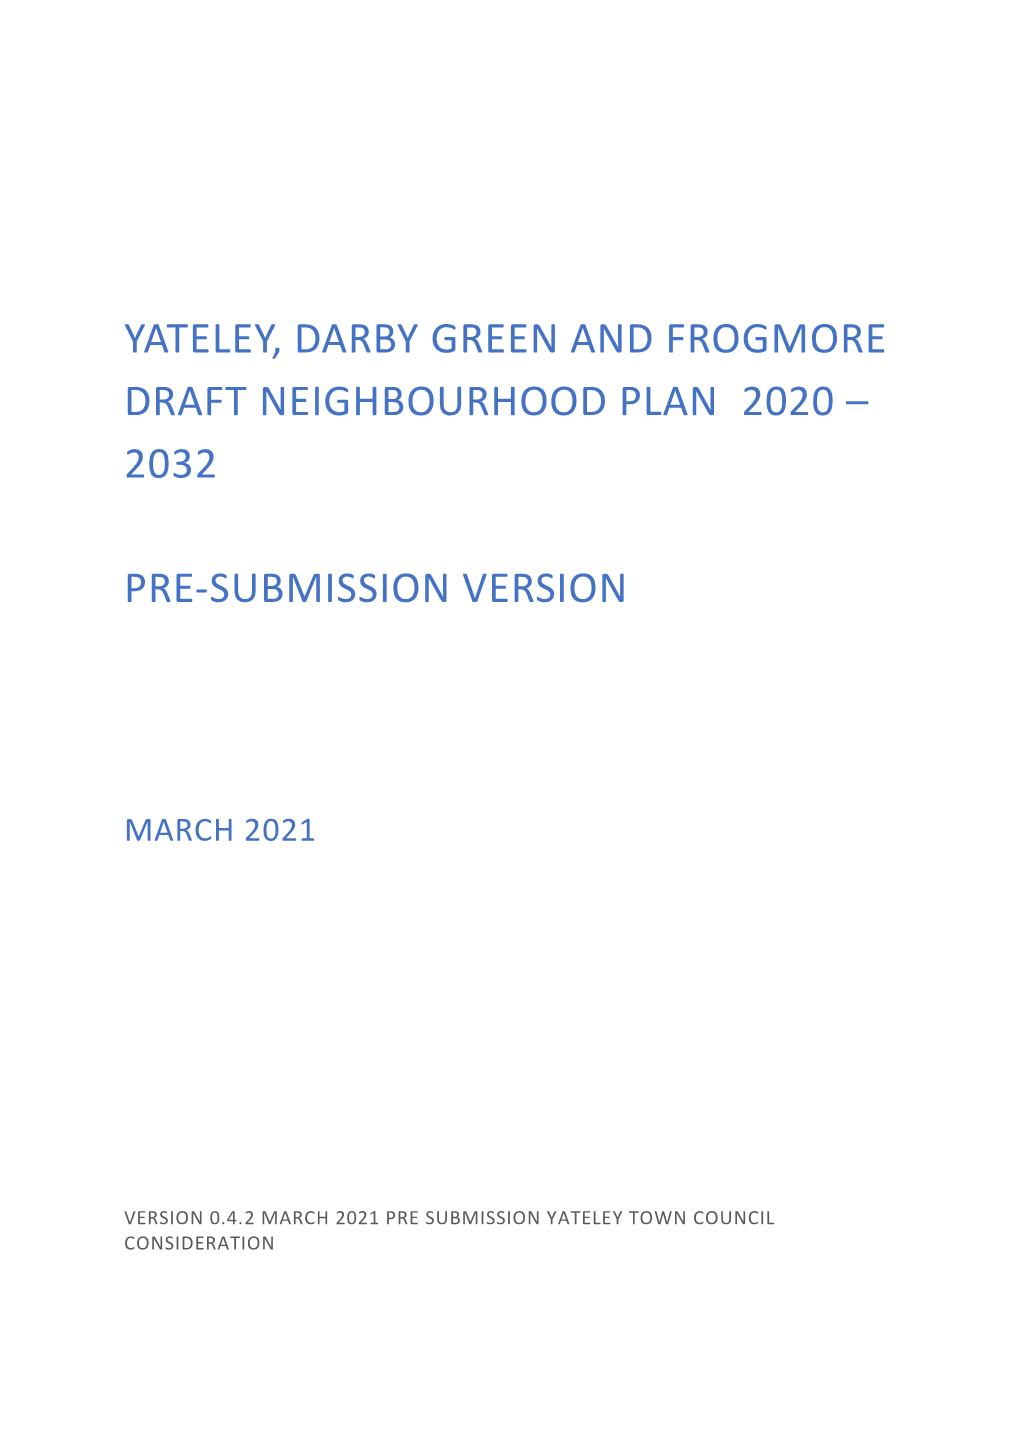 Yateley, Darby Green and Frogmore Draft Neighbourhood Plan 2020 – 2032